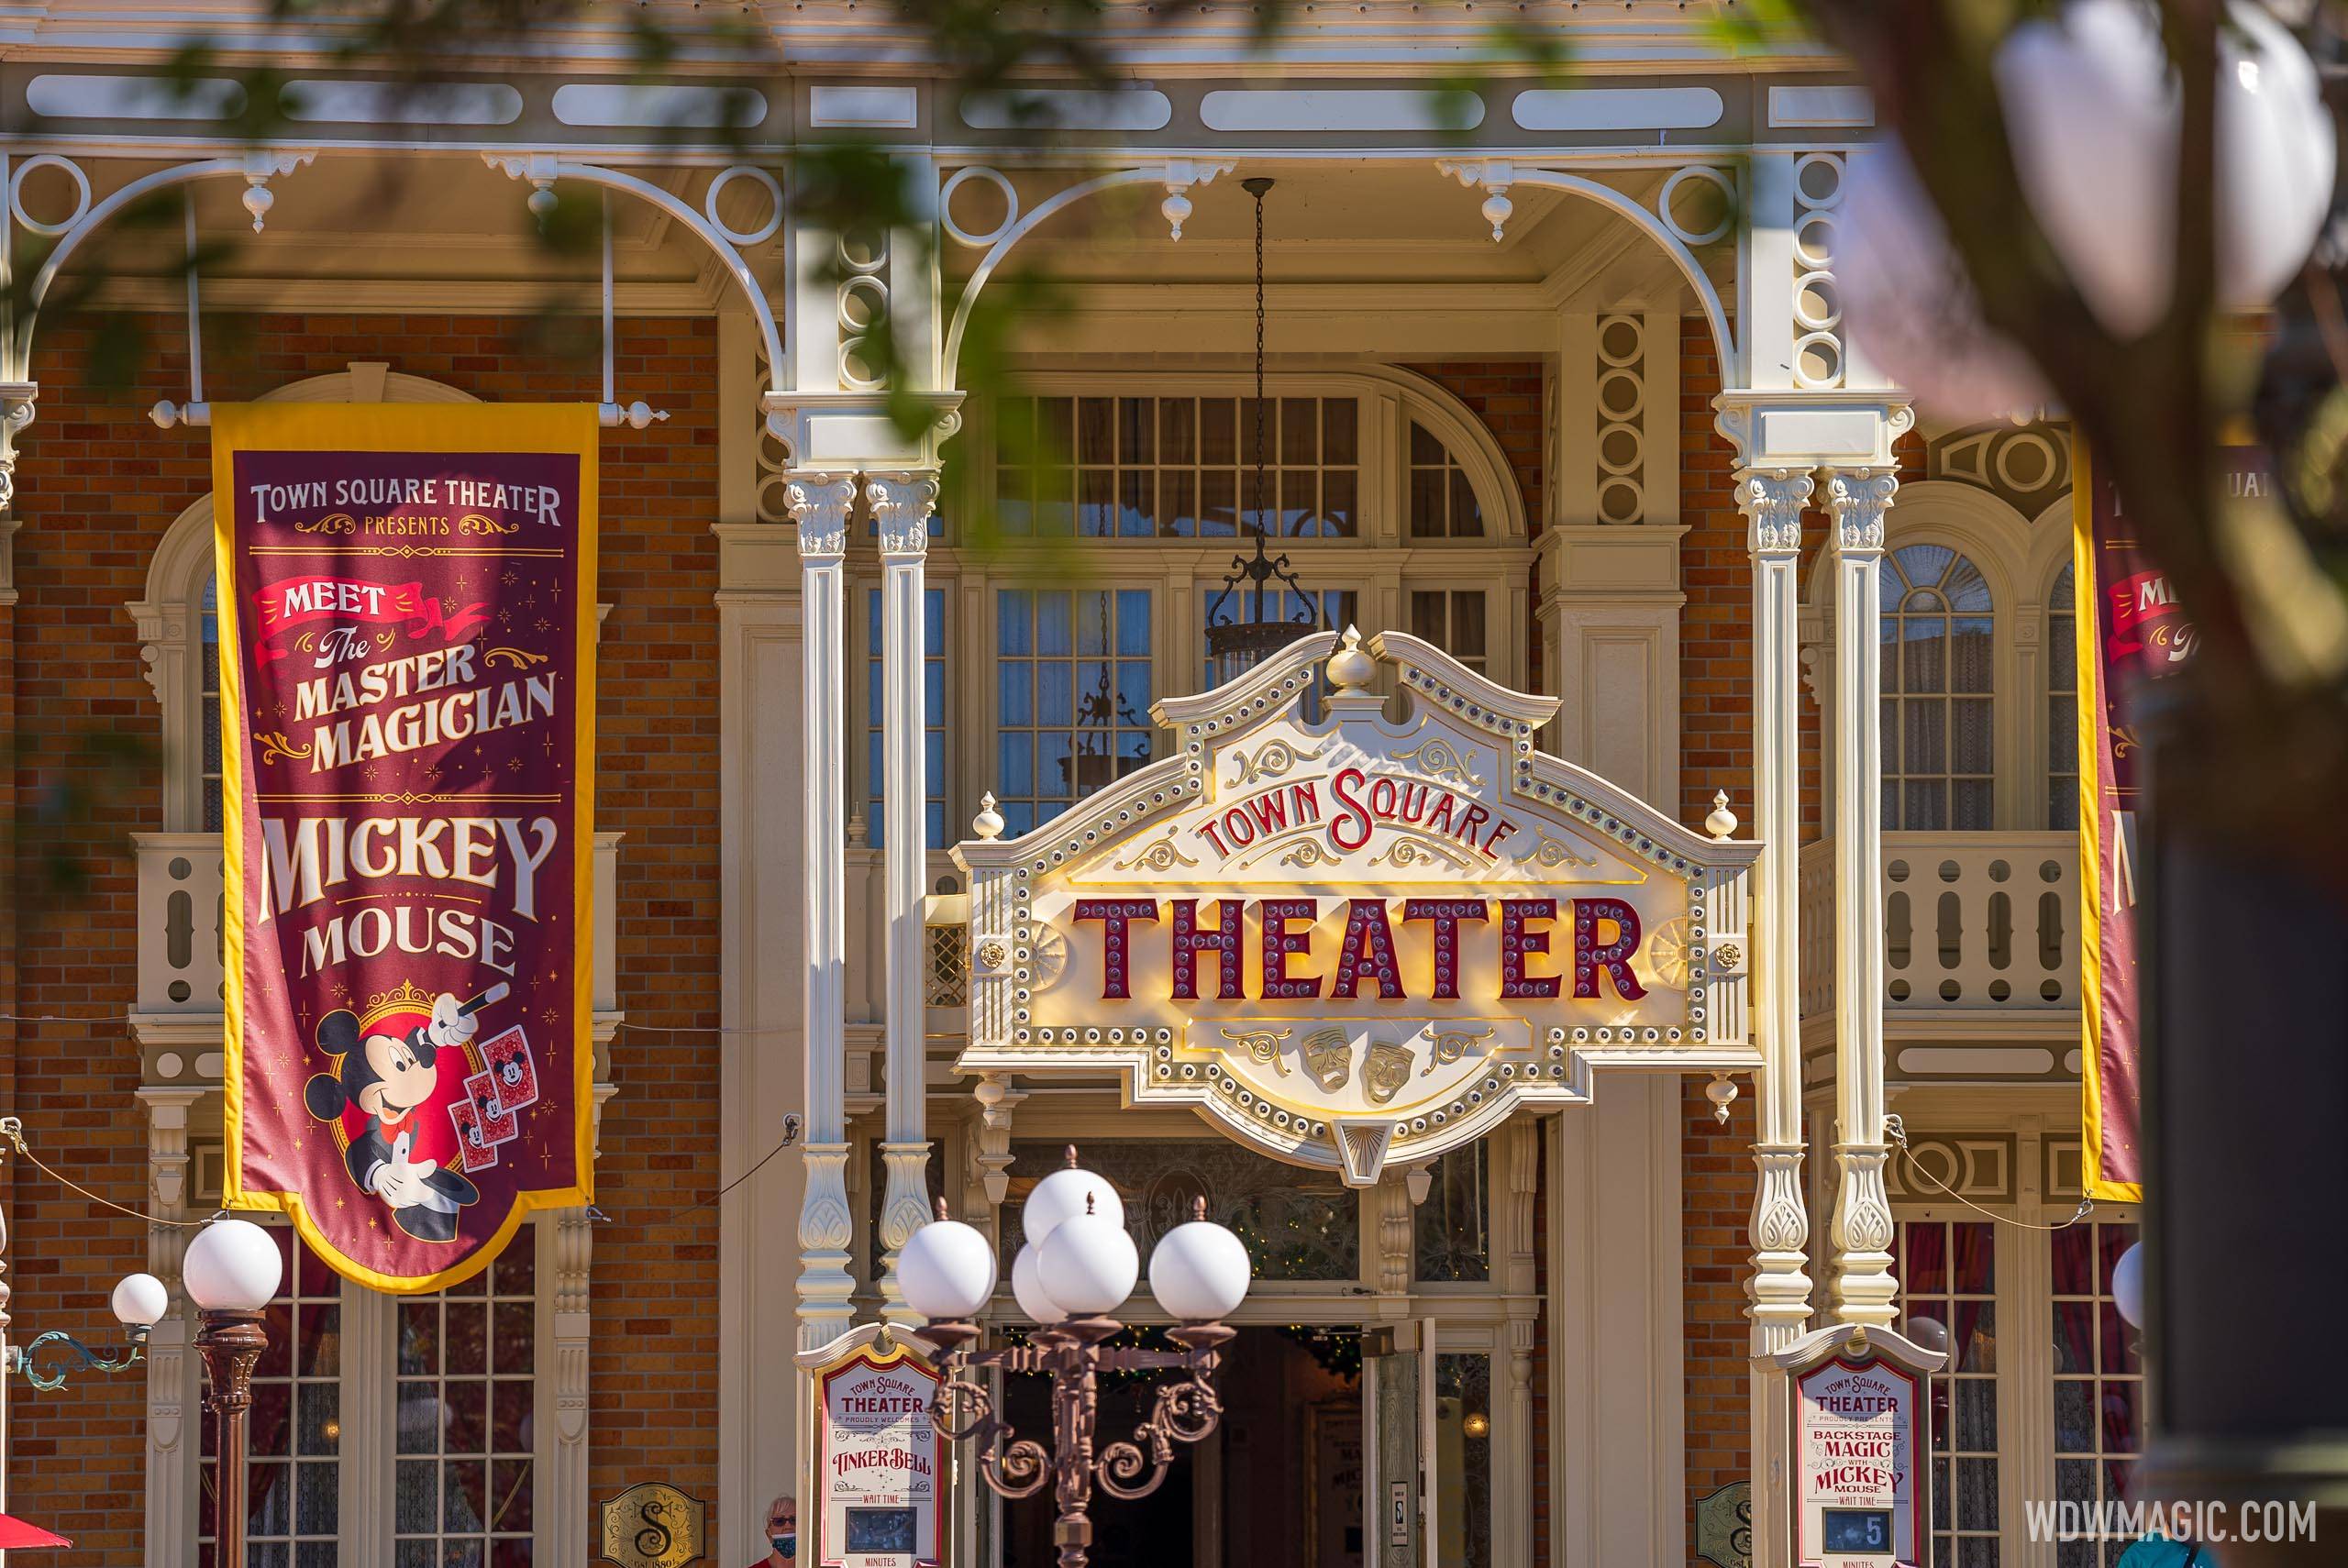 'Mickey Mouse Master Magician' banners return to Town Square Theater at Magic Kingdom